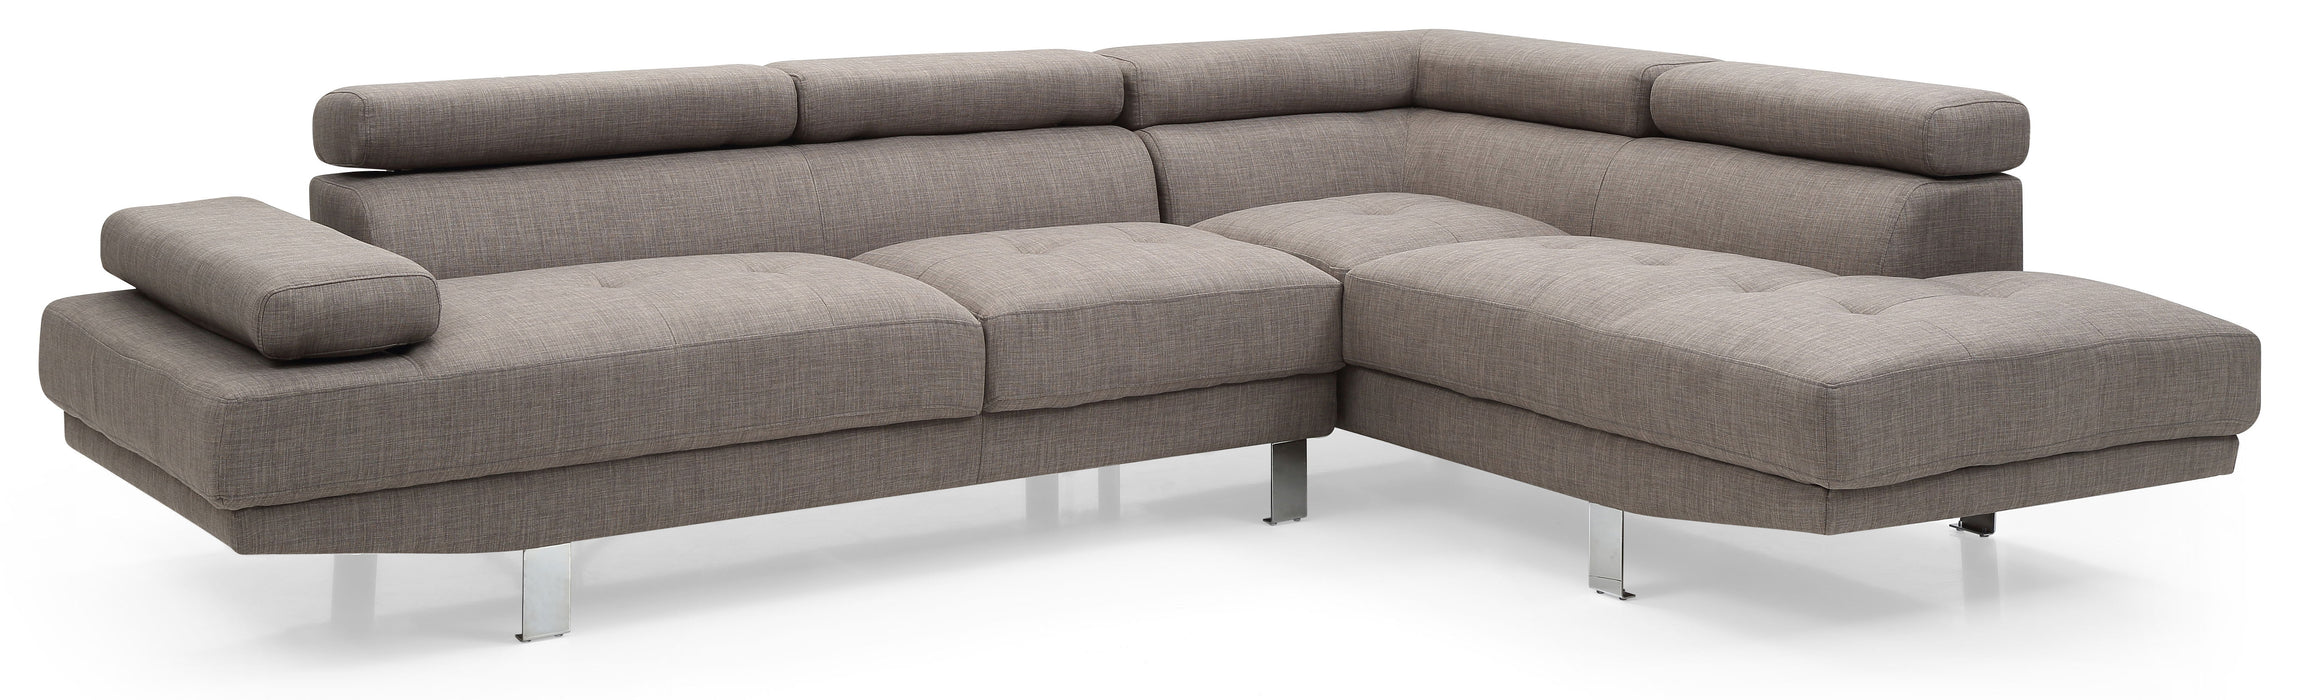 Glory Furniture Riveredge Sectional (2 Boxes), Gray - Fabric